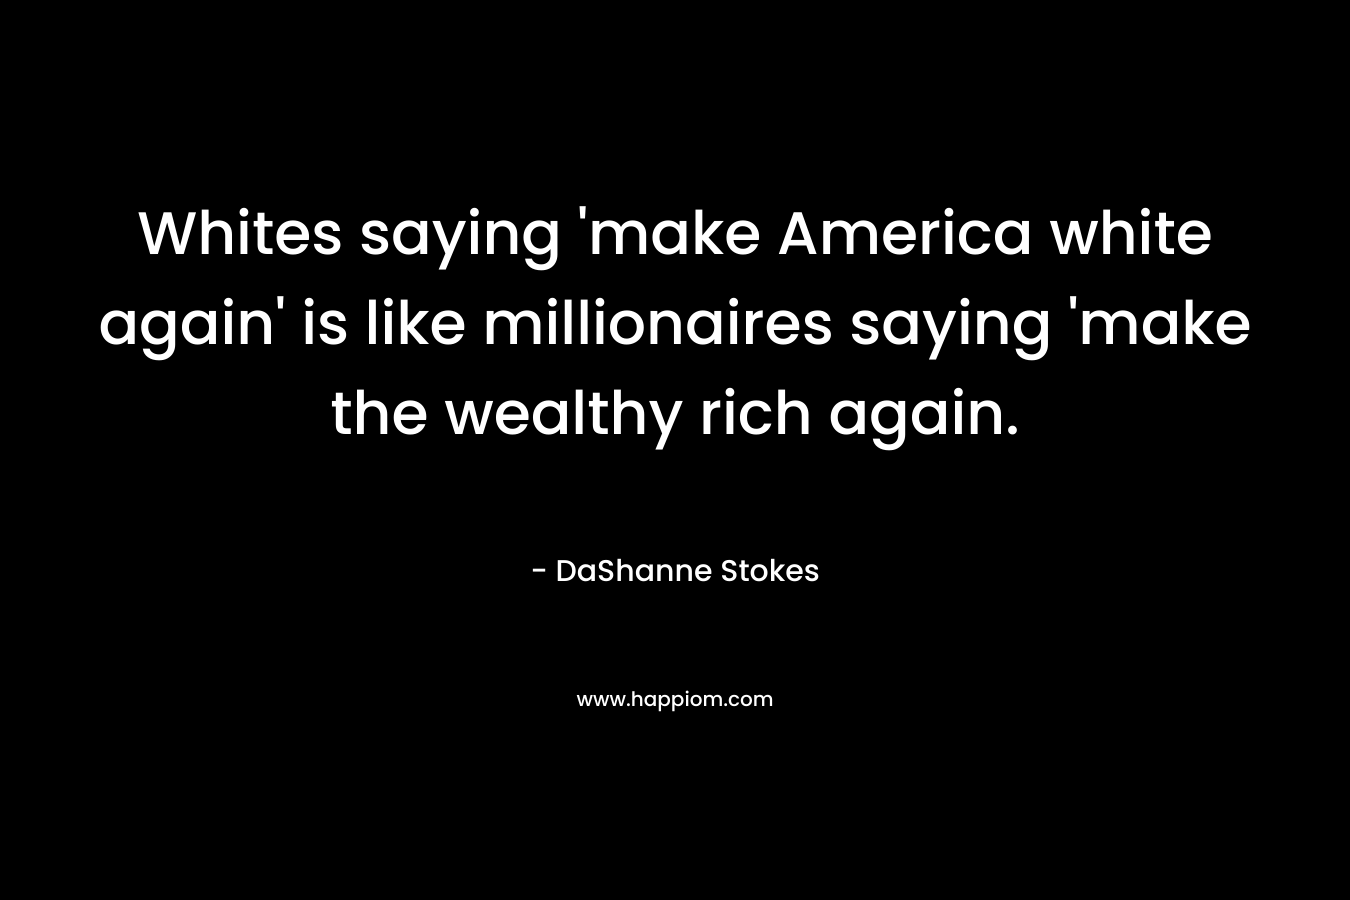 Whites saying 'make America white again' is like millionaires saying 'make the wealthy rich again.